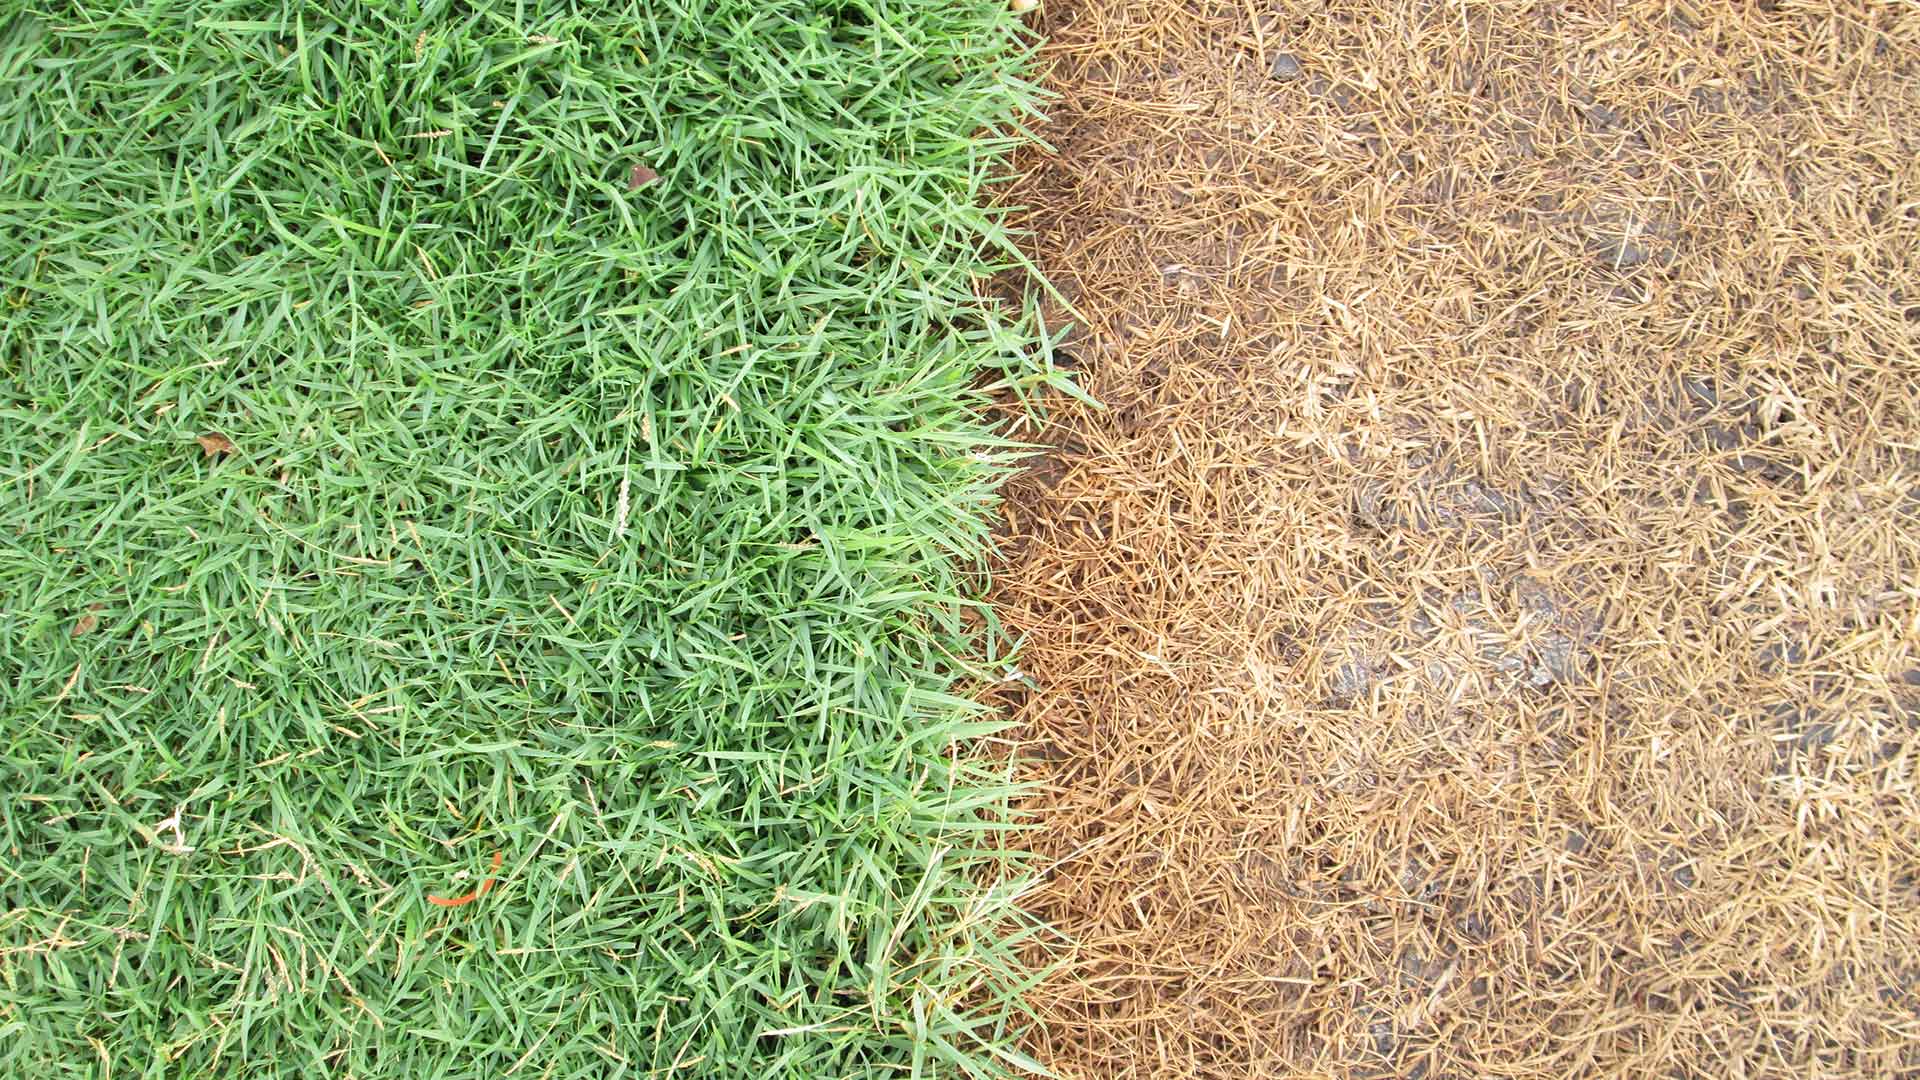 3 Mistakes You Could Make if You Try to Fertilize Your Own Lawn